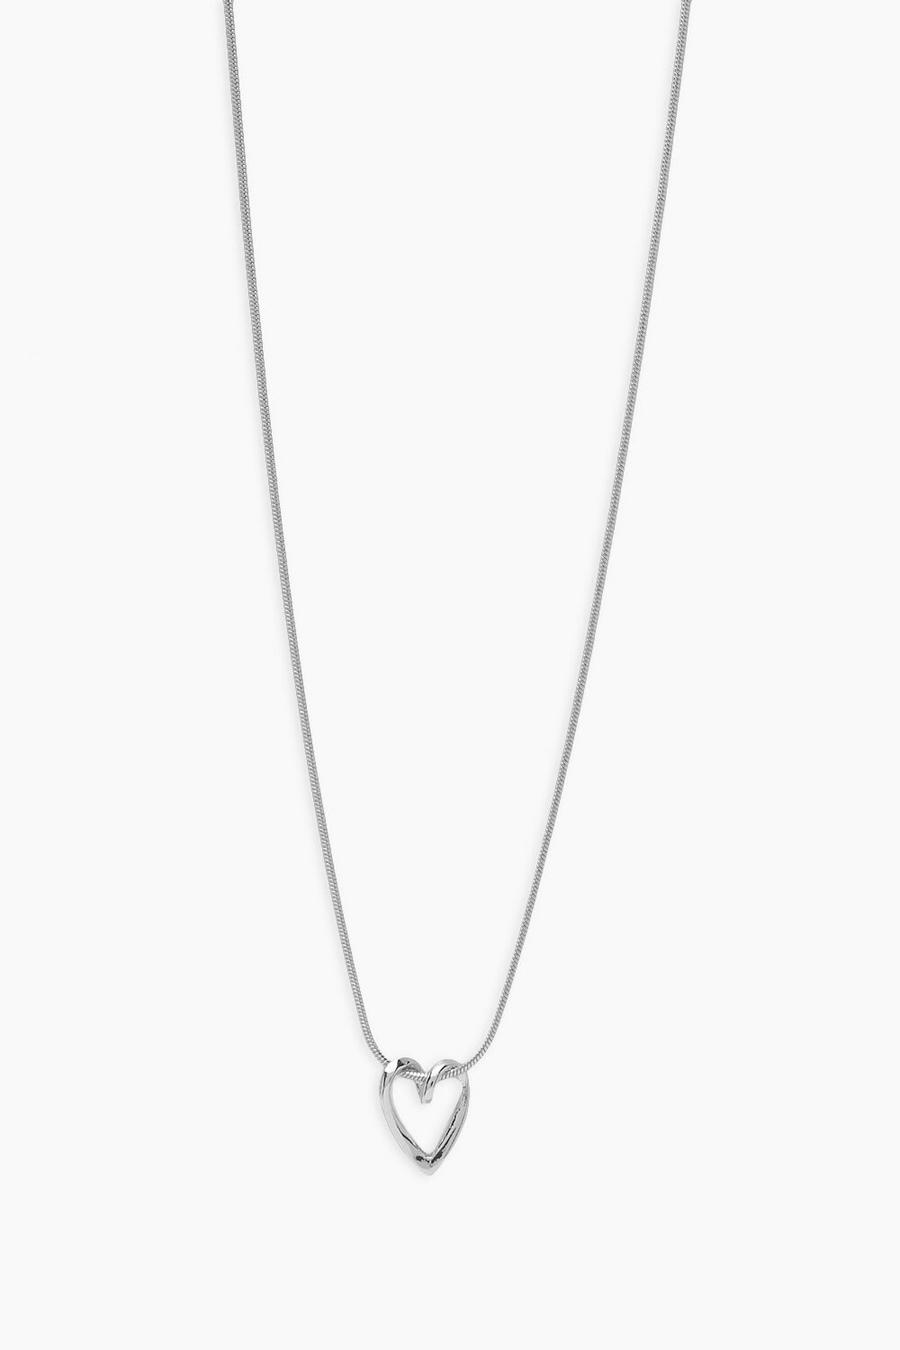 Real Silver Plated Delicate Heart Neclace